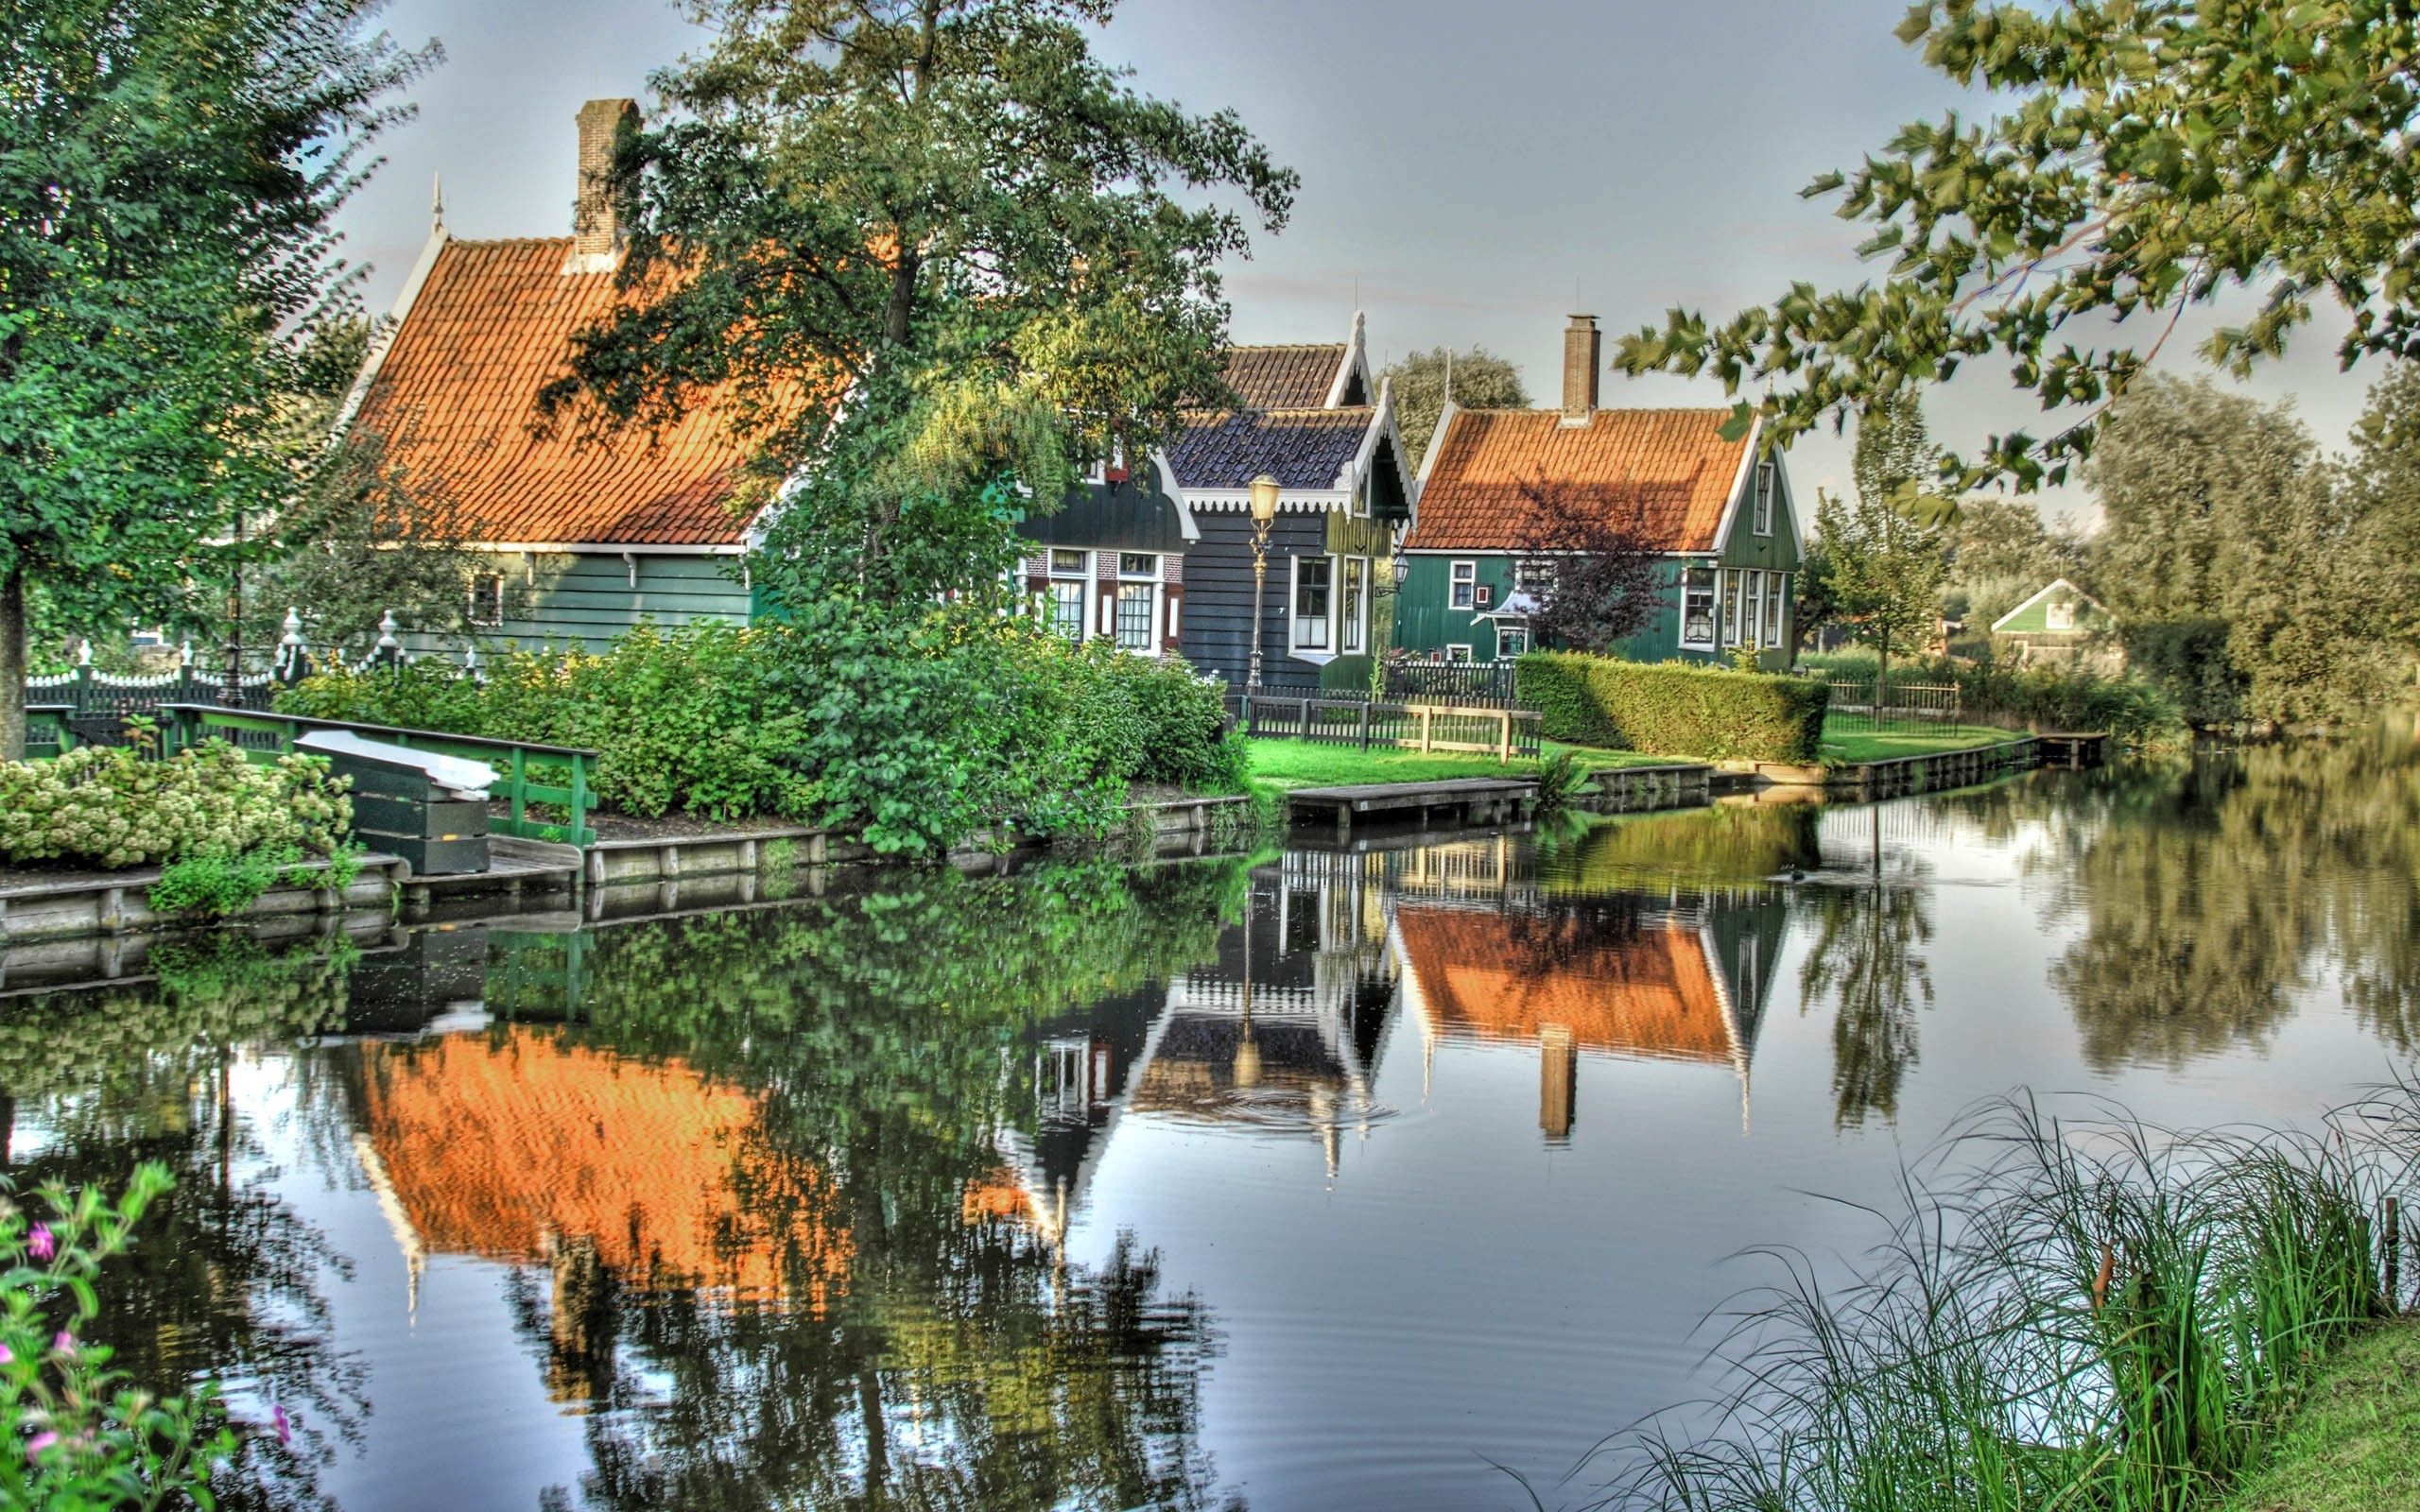 rivers, nature, houses, summer, reflection, small houses, villas, cottages